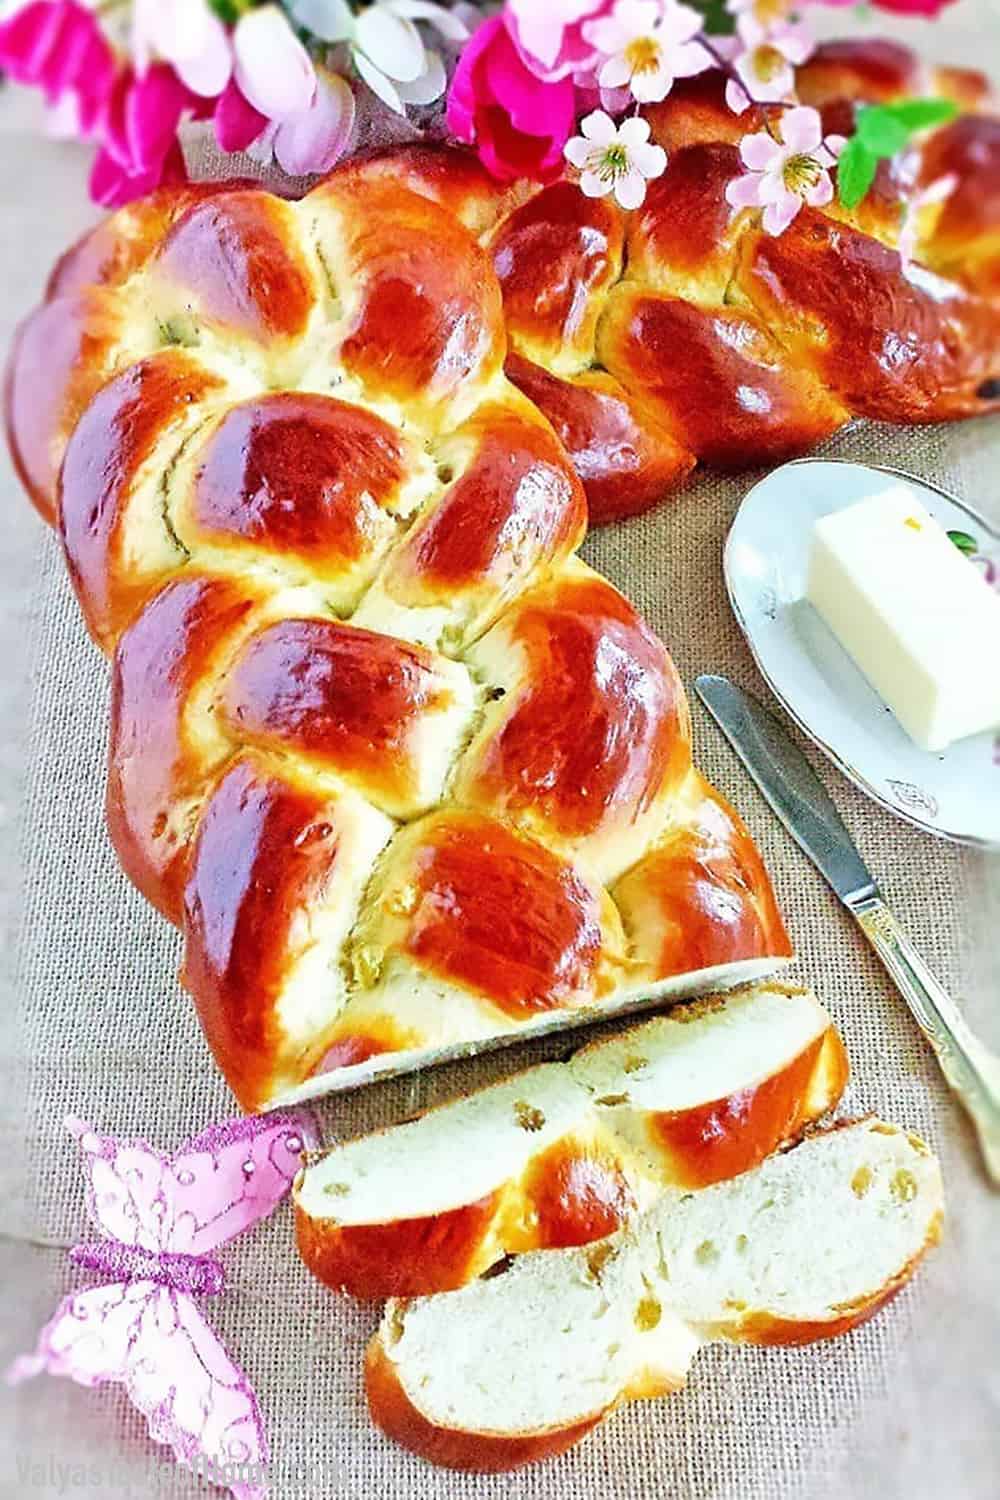 This Sweet Braided Easter Bread with Raisins is one of the items we make for Easter. It isn't difficult to make but is very much loved. In fact, your Kitchen Aid mixer does most of the work for you.